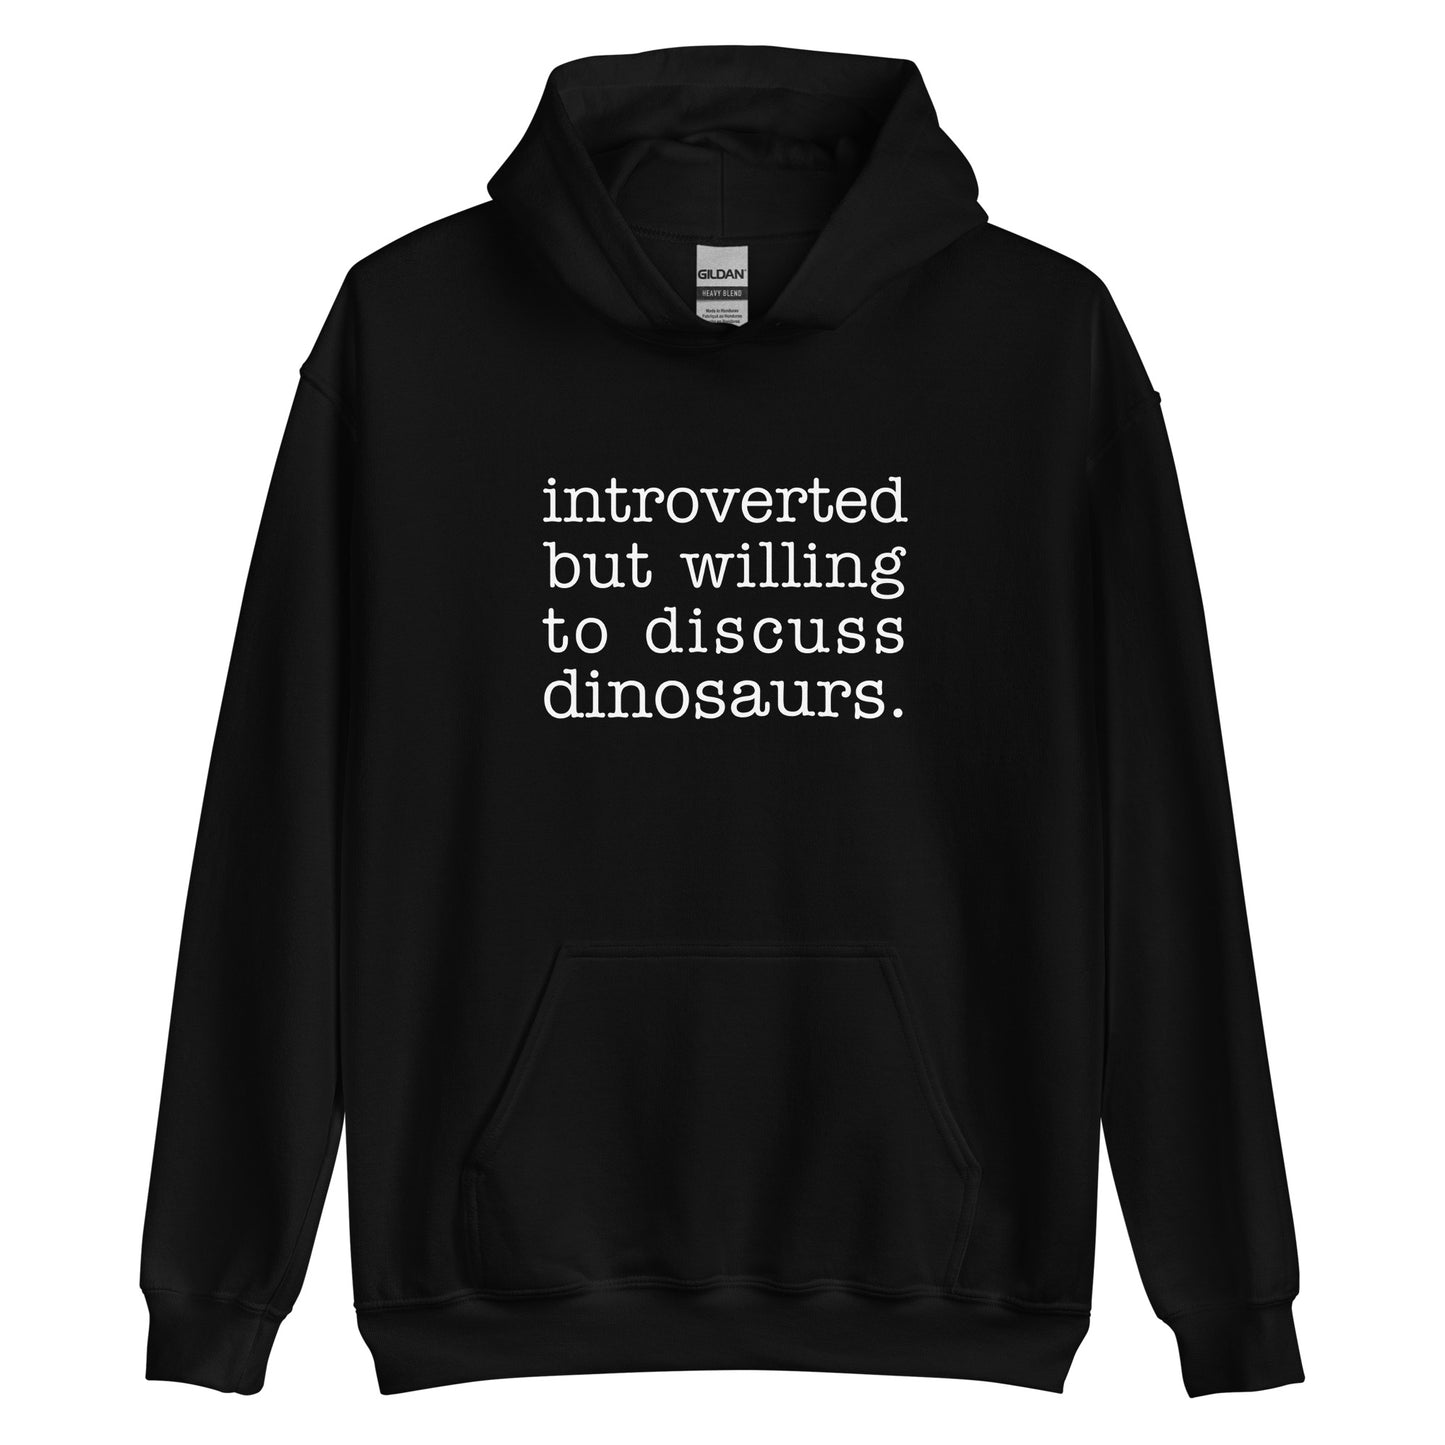 A black hooded sweatshirt with white text reading "introverted but willing to discuss dinosaurs"